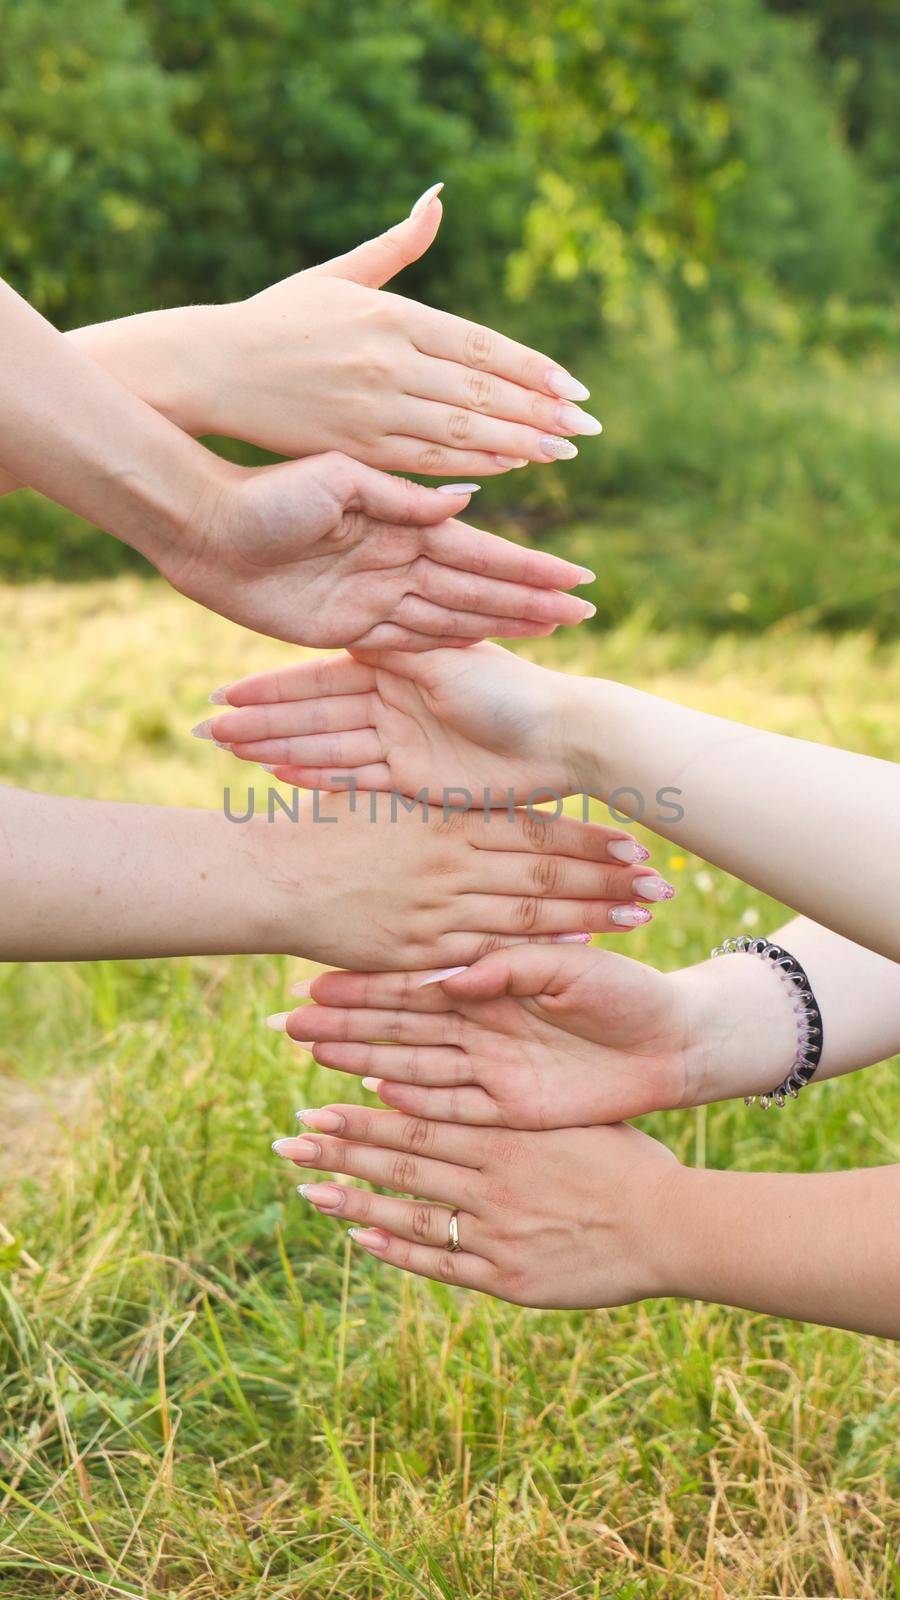 Girlfriends put their palms of their hands on top of each other